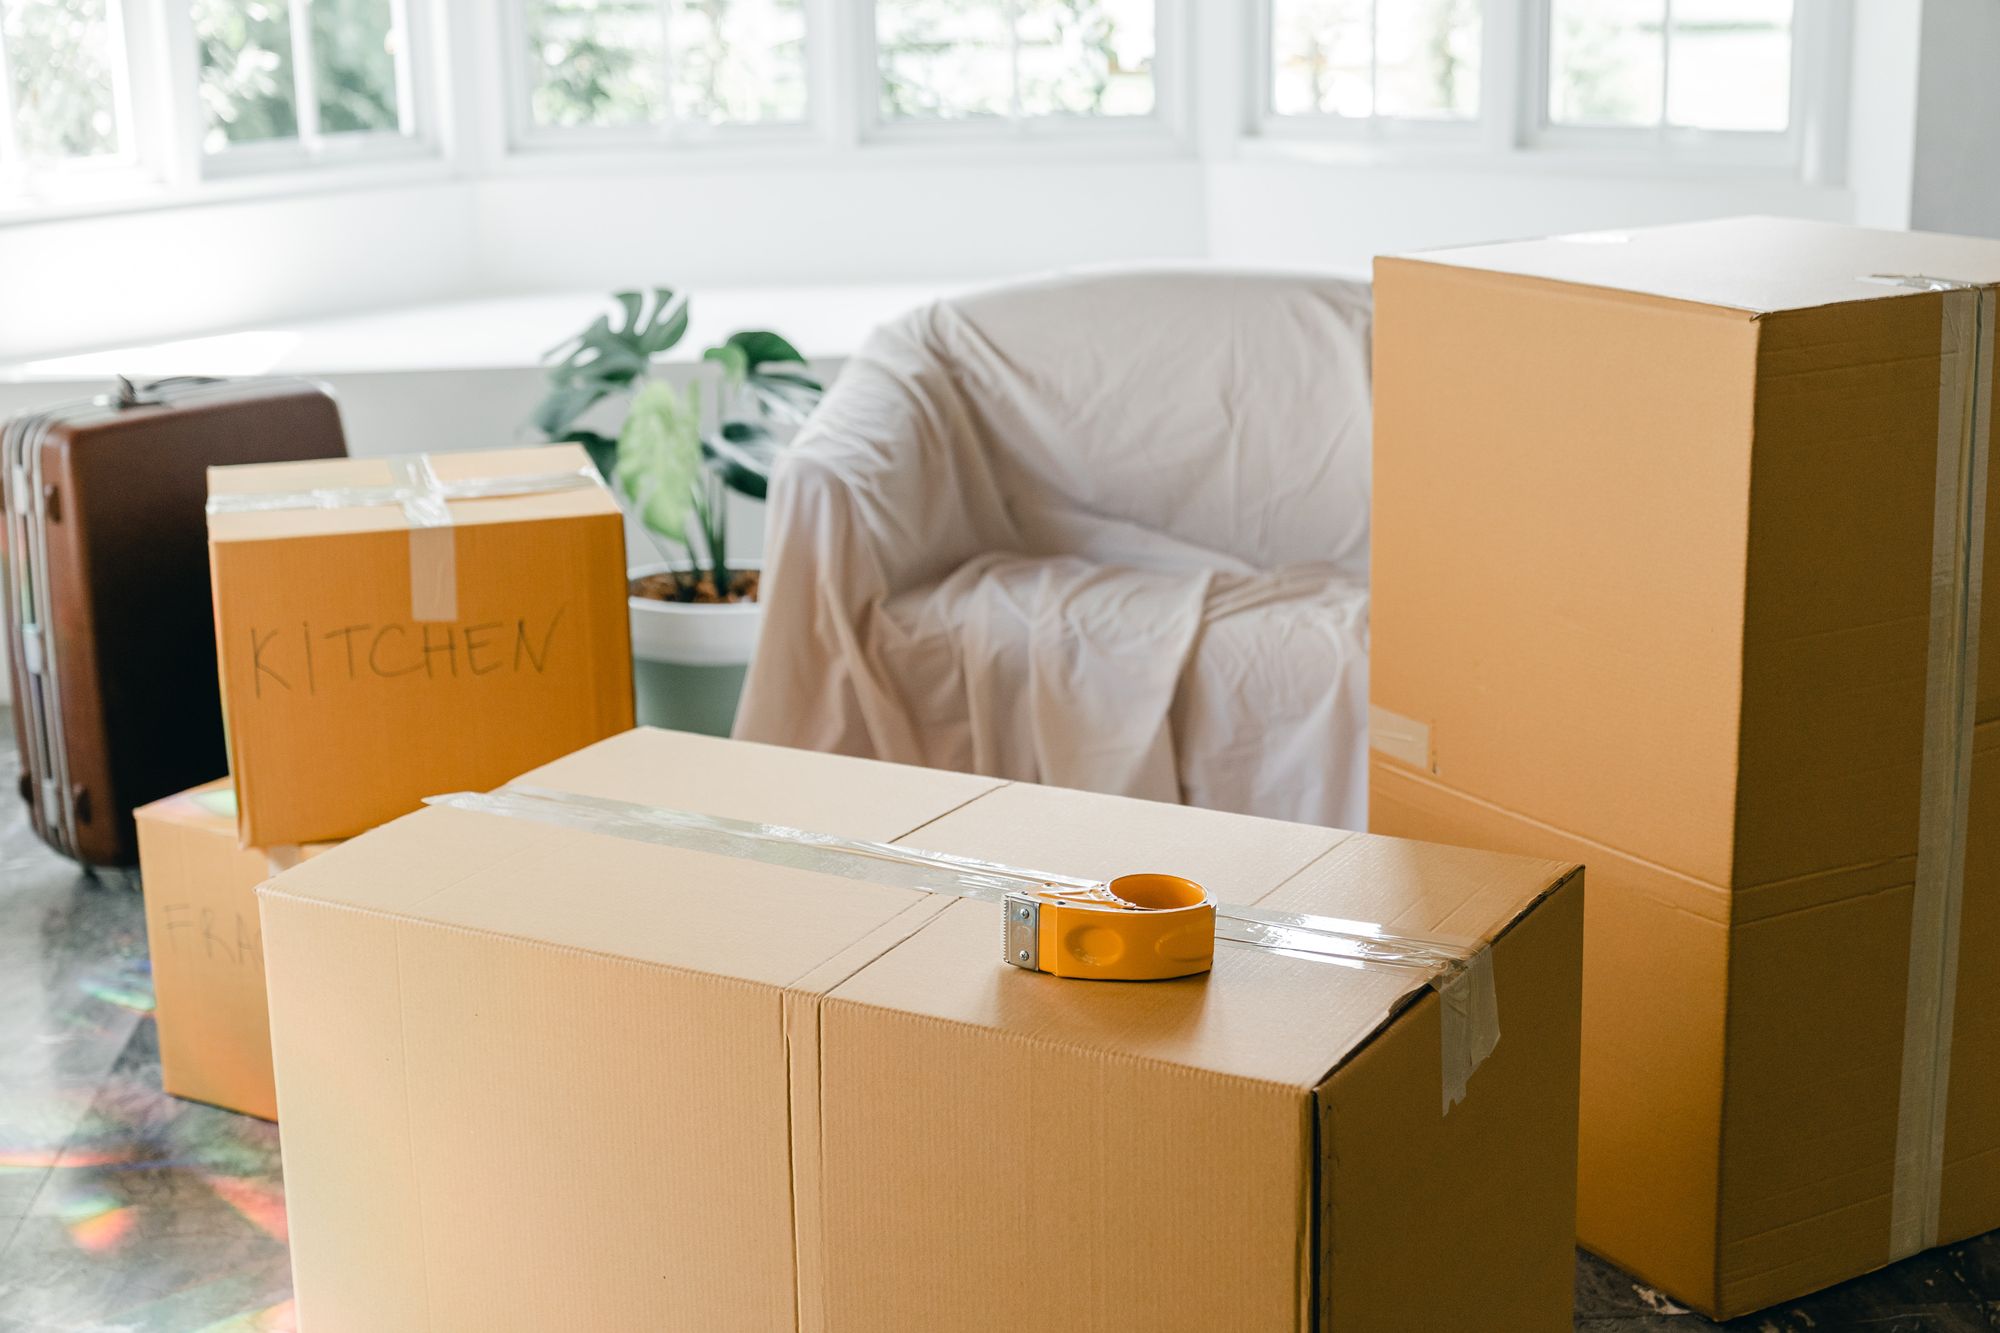 Photo of an empty apartment with packed moving boxes and a suitcase